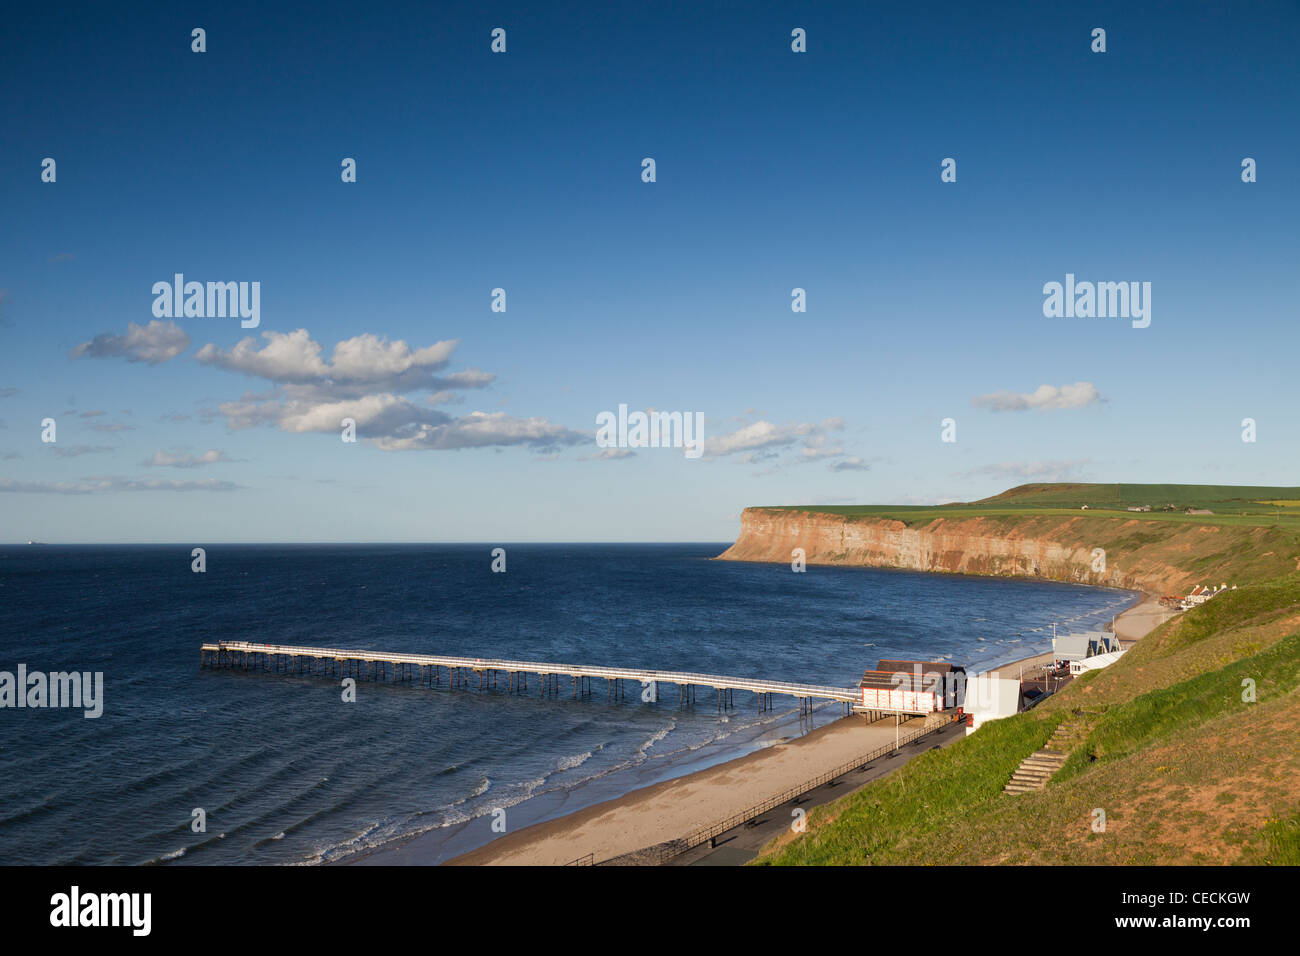 View of Saltburn-by-the-Sea, with the Pier, and Huntcliff beyond, from the upper town. Stock Photo